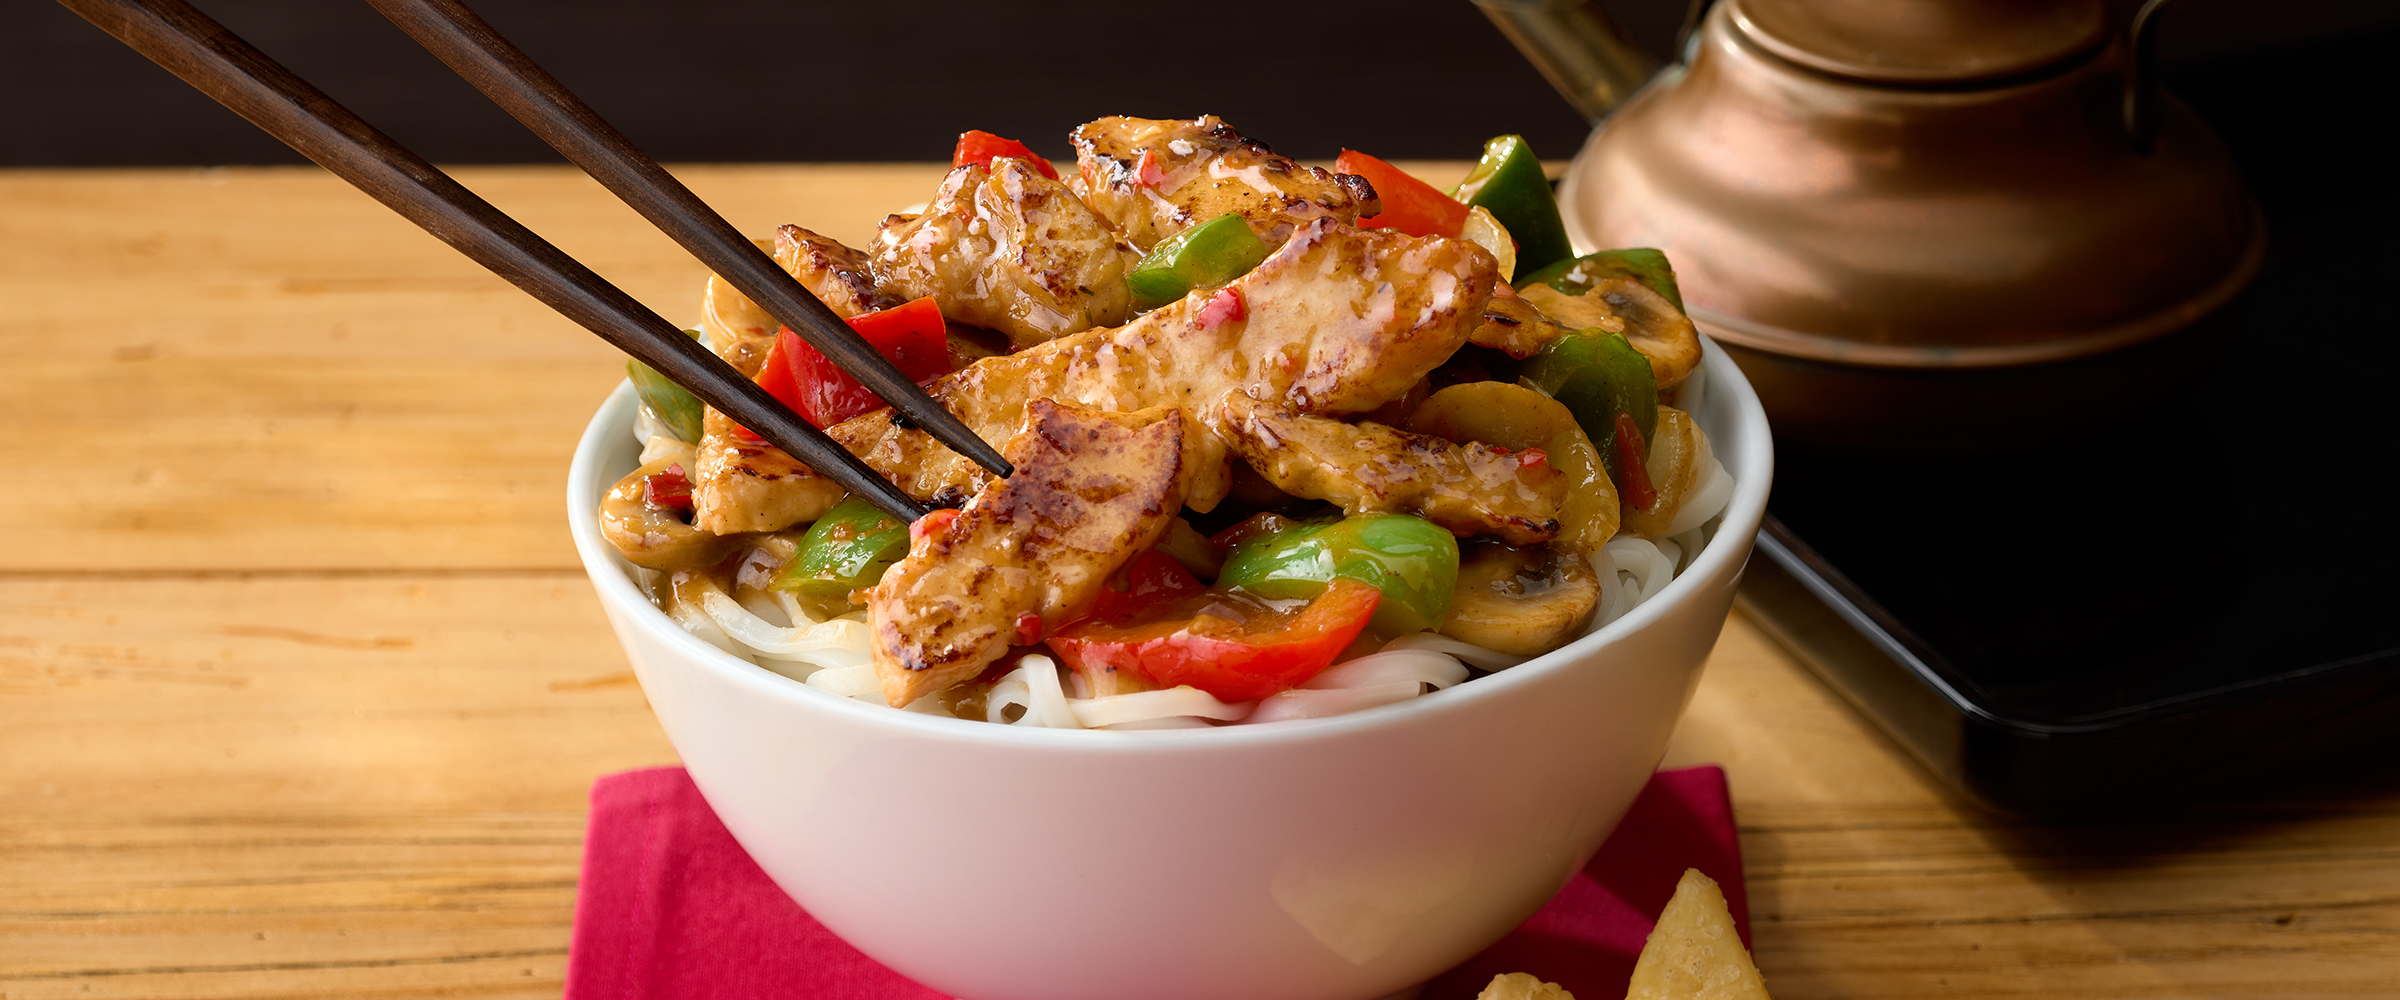 Mongolian Style Pork and Vegetable Noodle Stir Fry